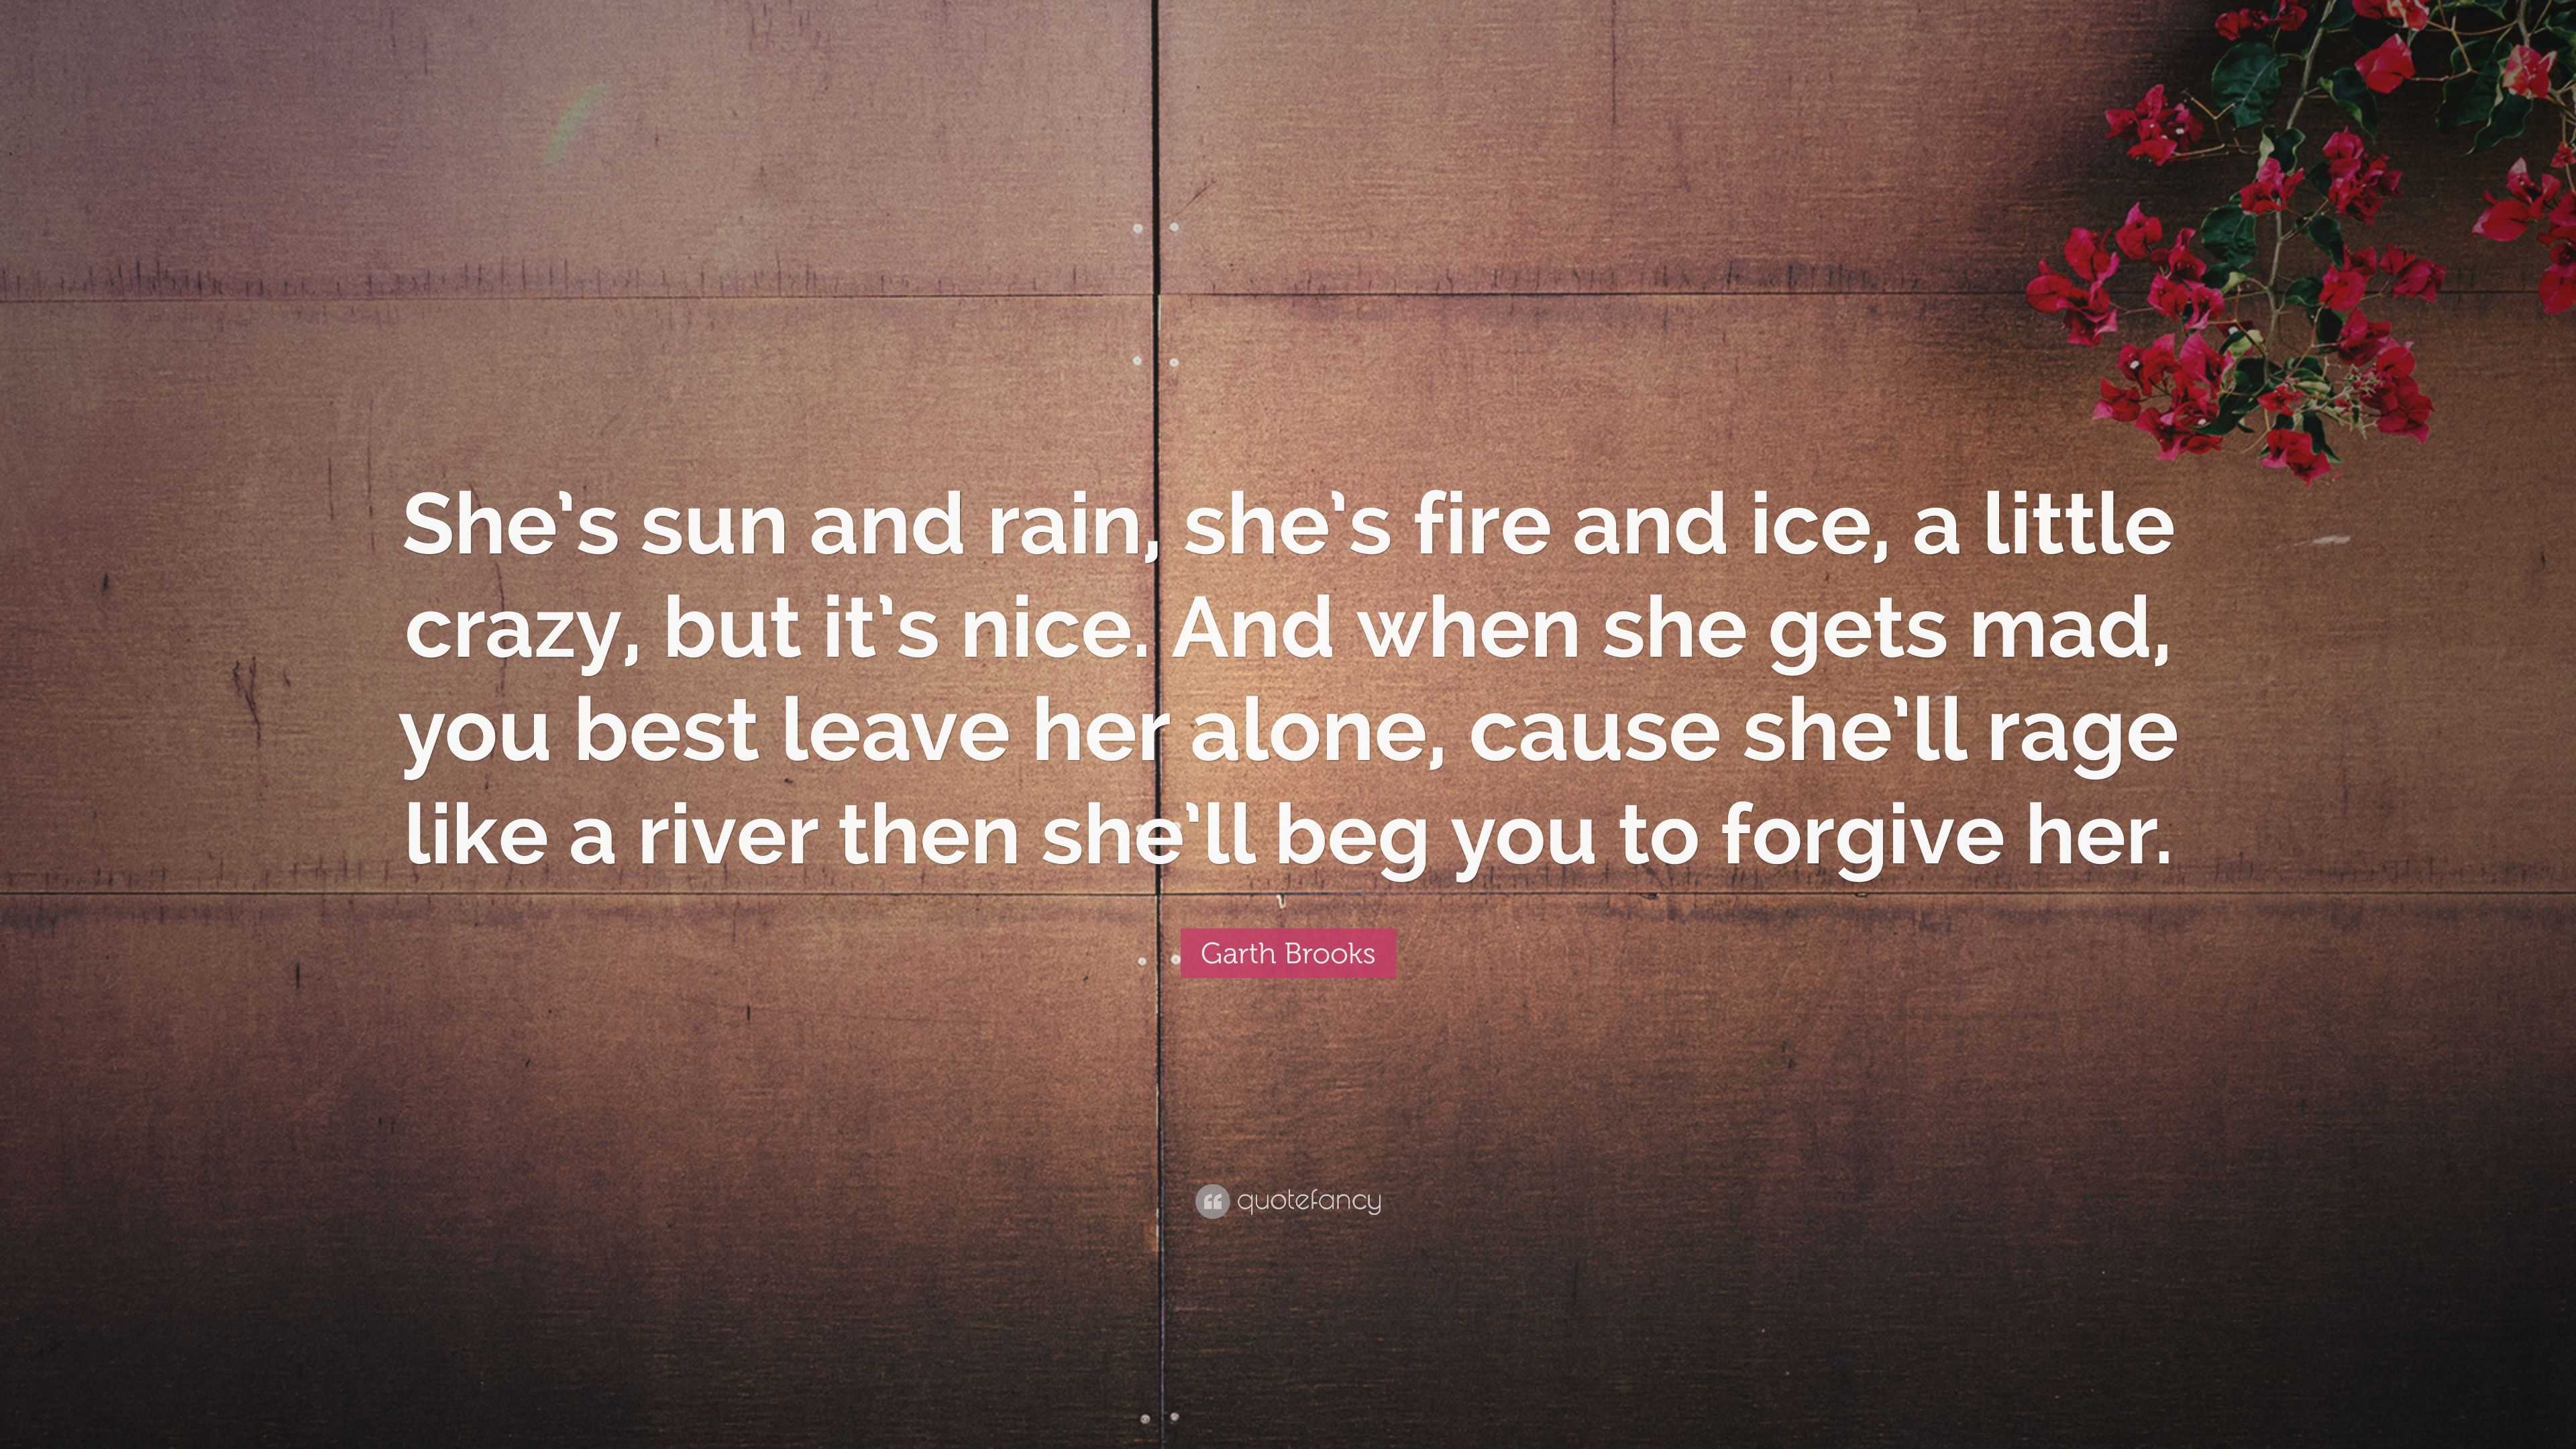 Garth Brooks Quote “She s sun and rain she s fire and ice a